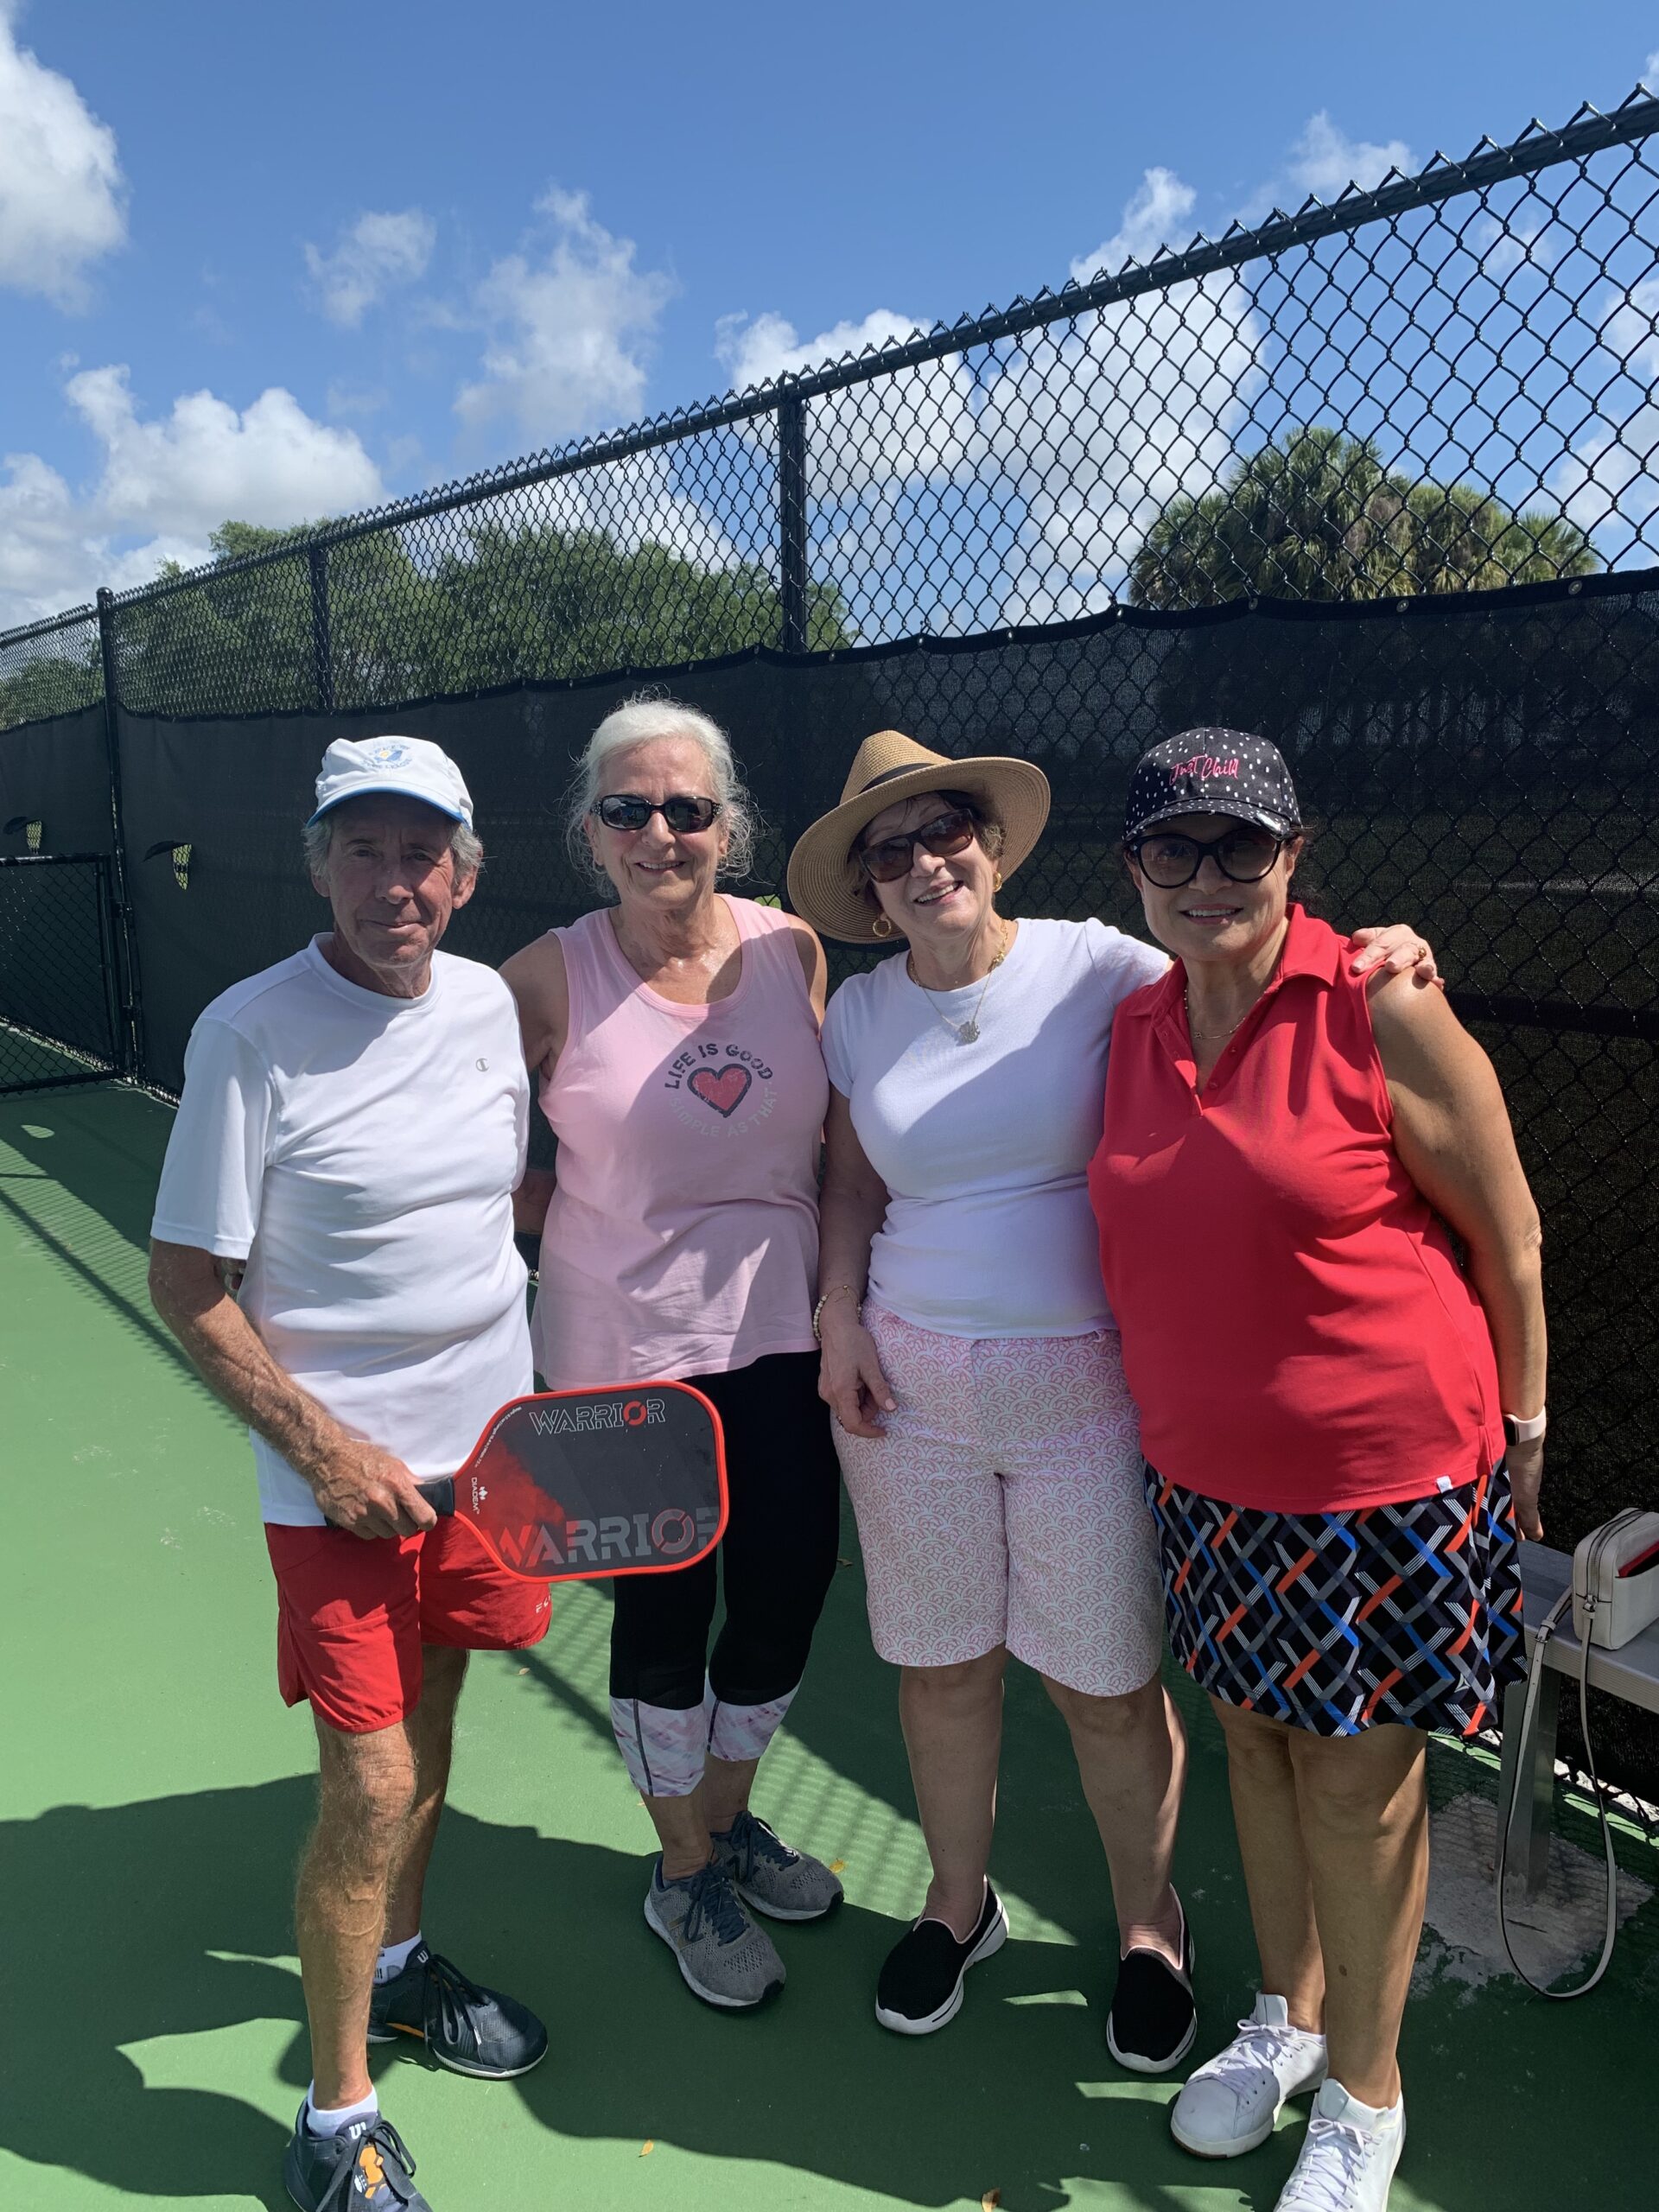 bob-with-suzanne-ronelle-and-matilde-after-a-beginners-pickleball-clinic-in-boca-raton